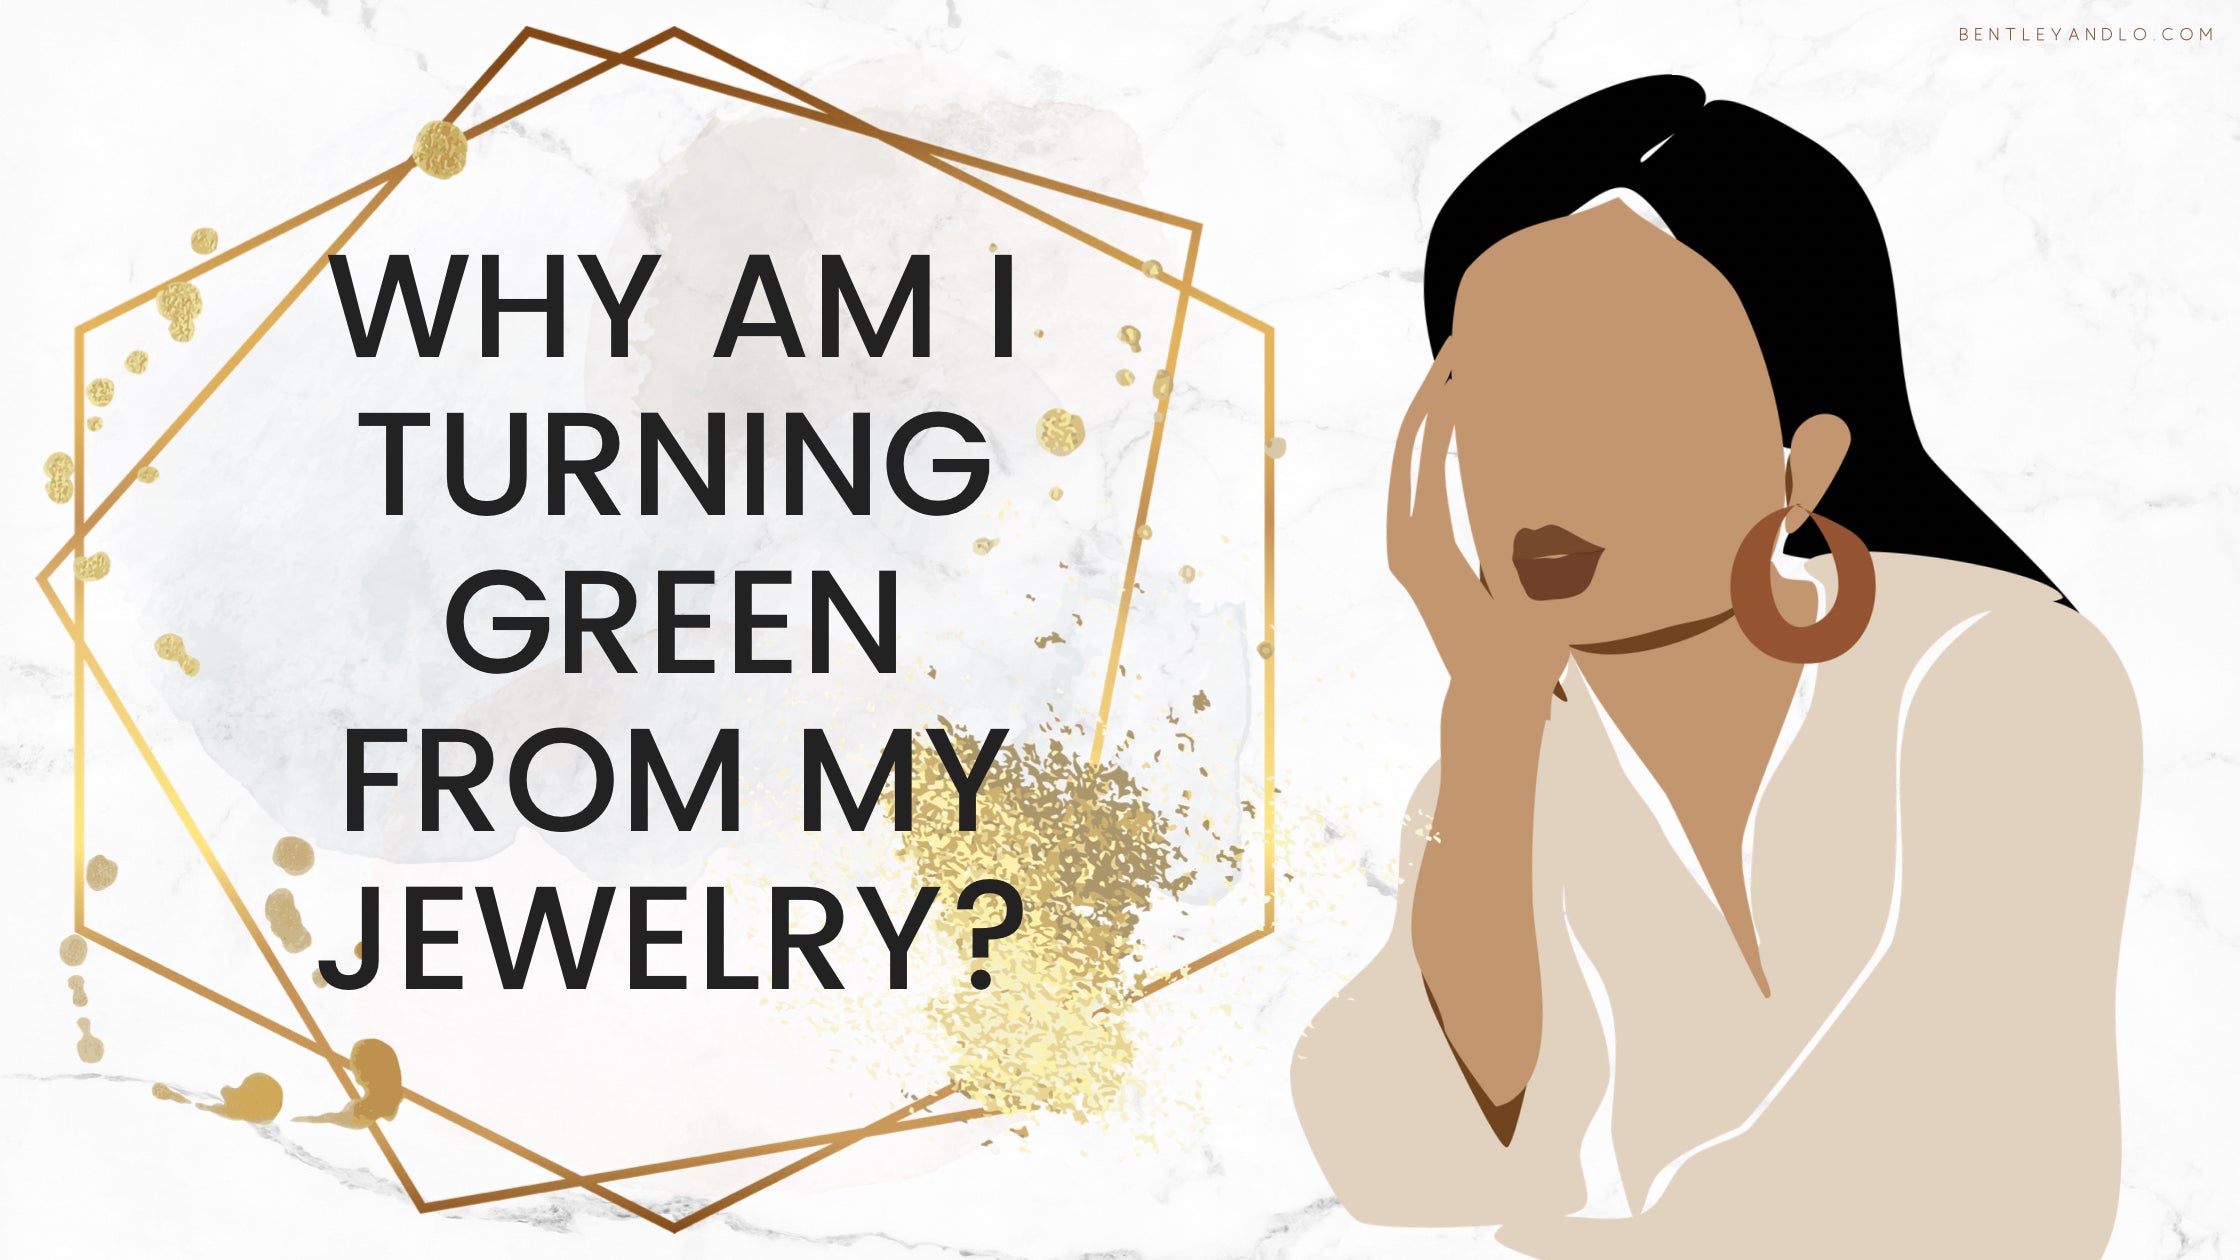 Why Am I Turning Green From My Jewelry?